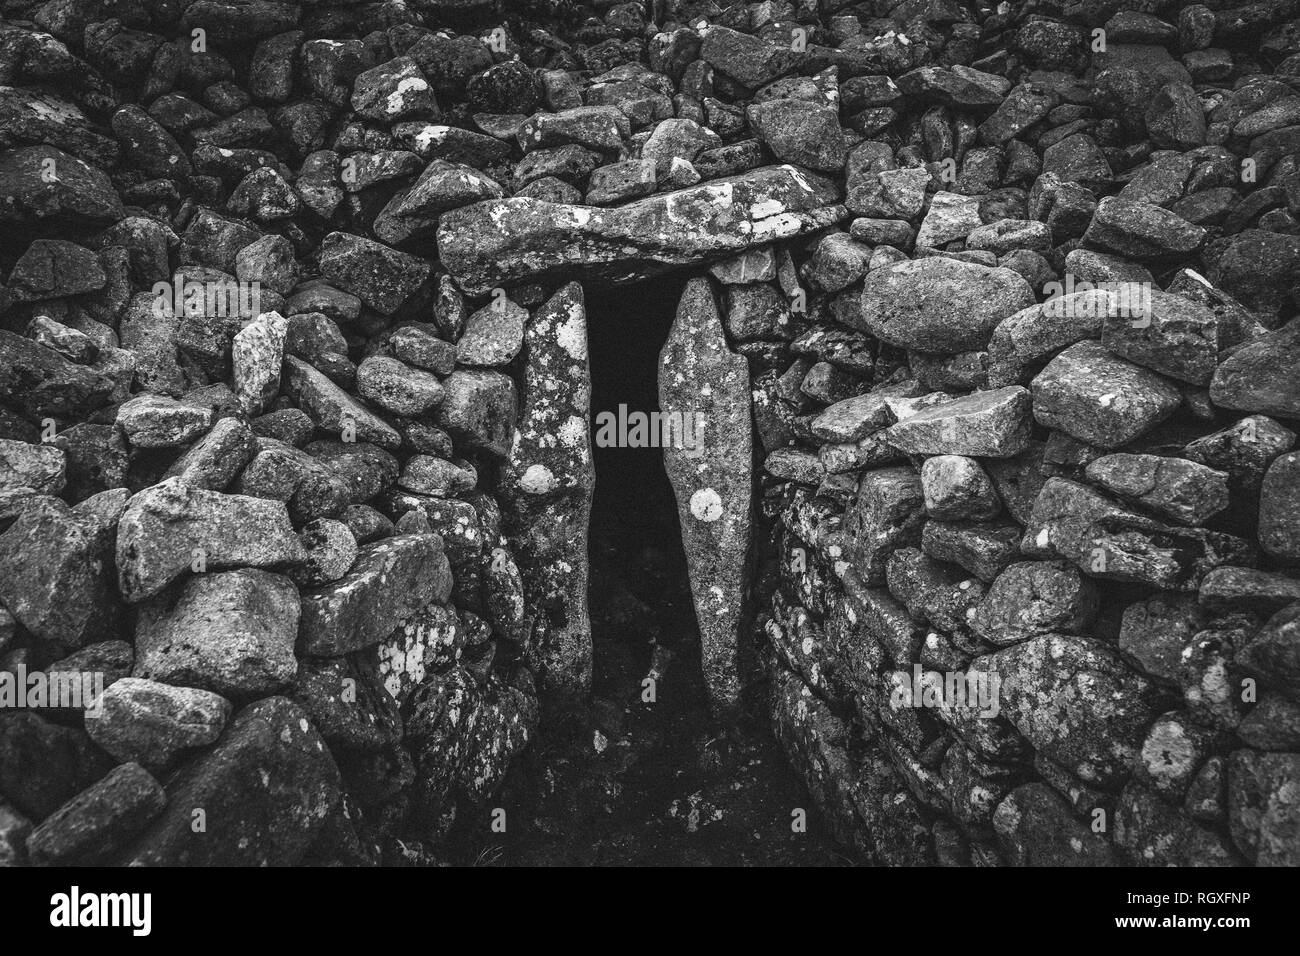 Entrance to the Irish Megalithic Passage Burial Tomb located on a summit of Seefin Mountain, Wicklow, Ireland dating back to the Neoltic Period. Stock Photo